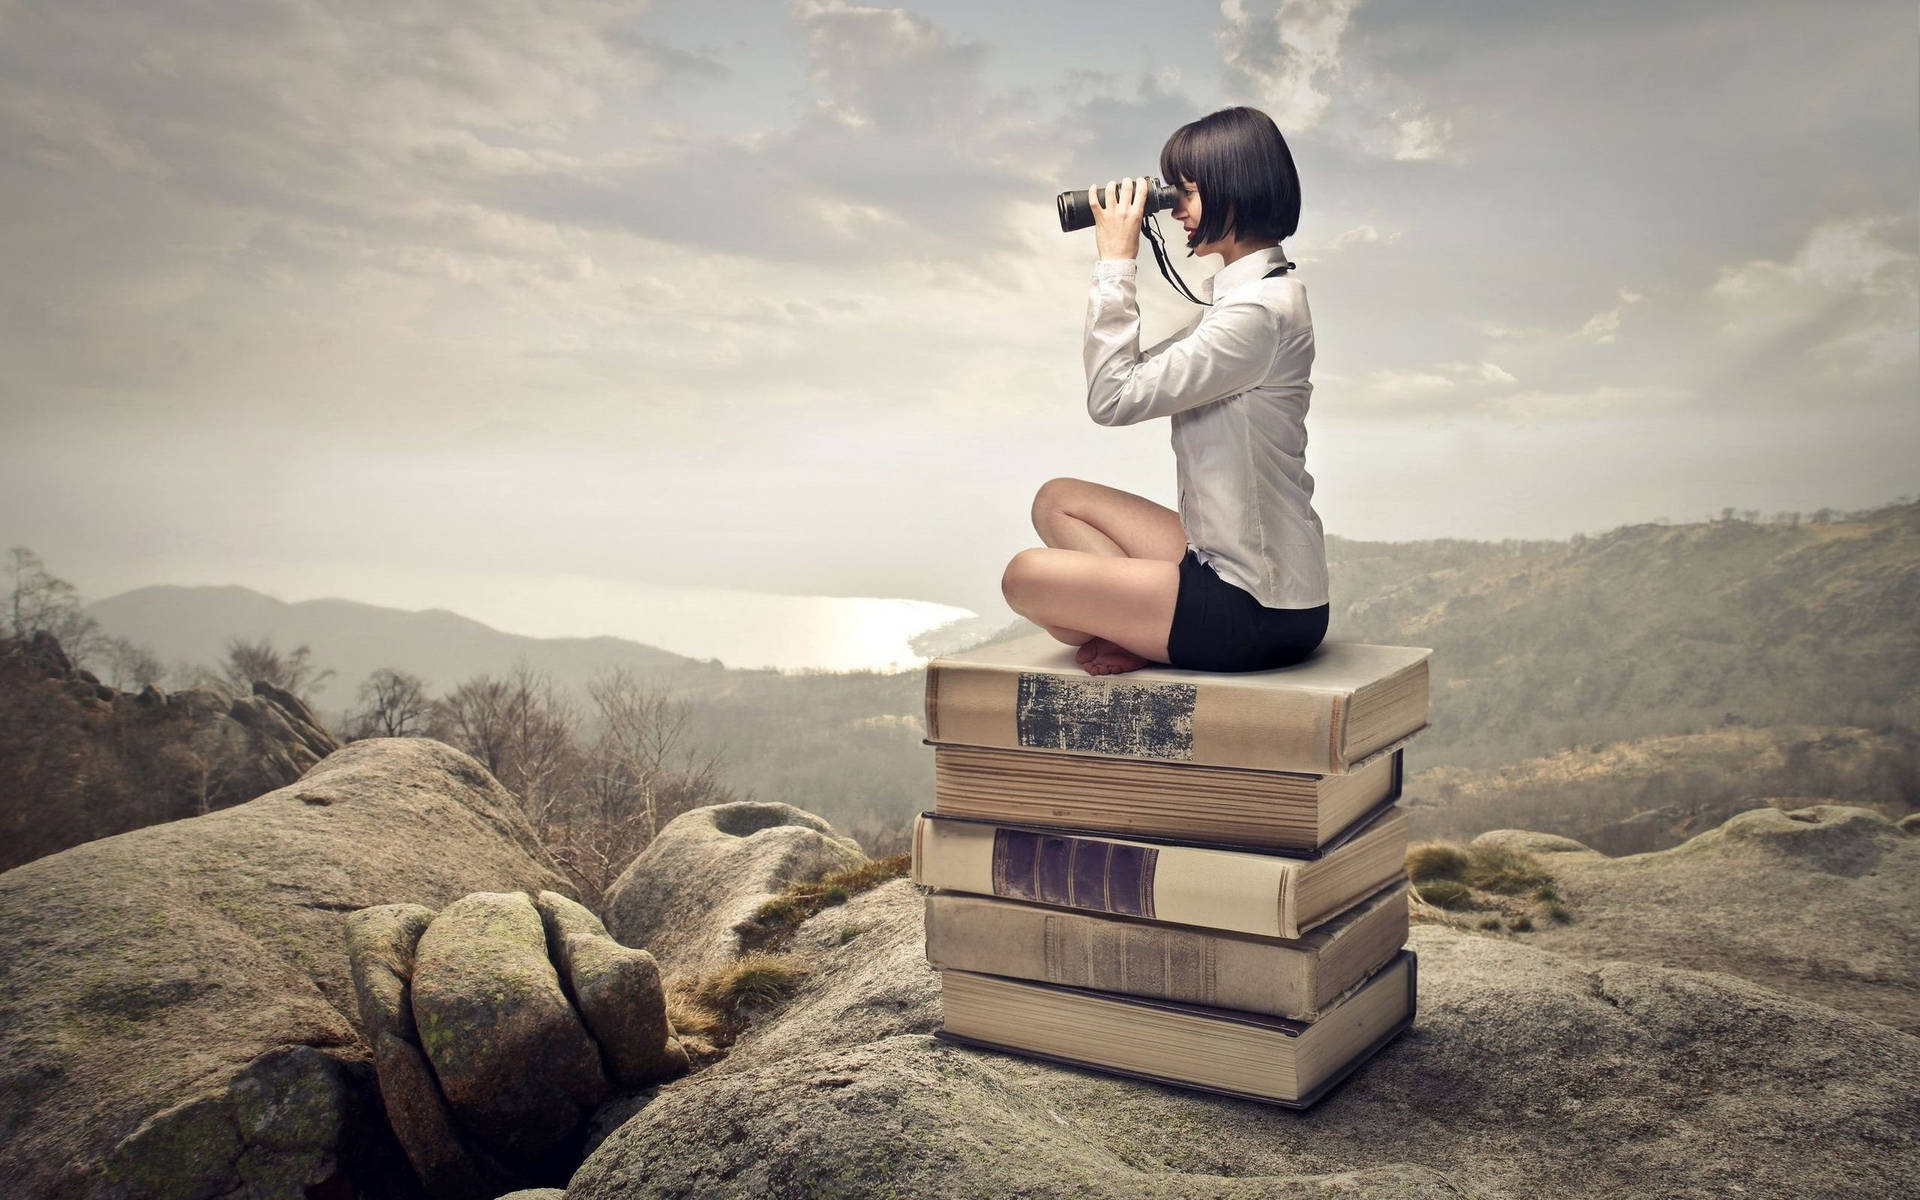 Digital Art Of A Girl With Telescope Seated On Books Background